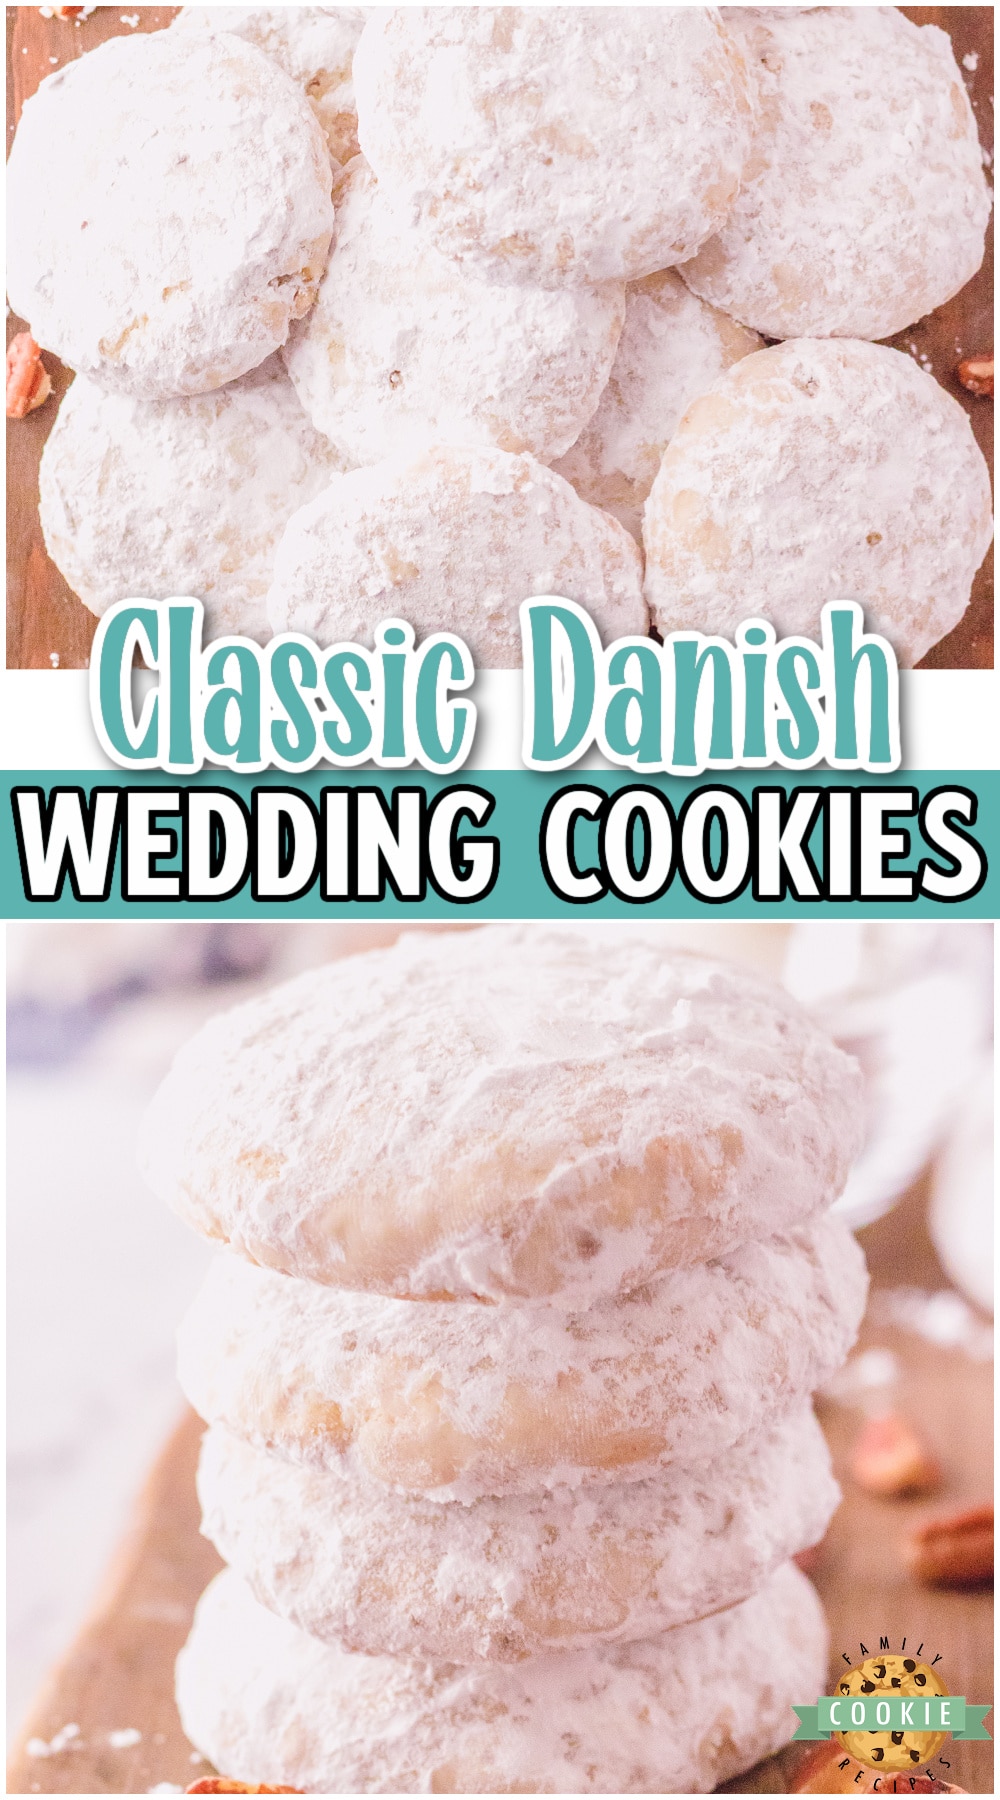 Classic Danish Wedding Cookies made with flour, butter, pecans & powdered sugar! Simple buttery cookie ball rolled in powdered sugar with just a touch of warm cinnamon flavor. Perfect for butter pecan lovers! 